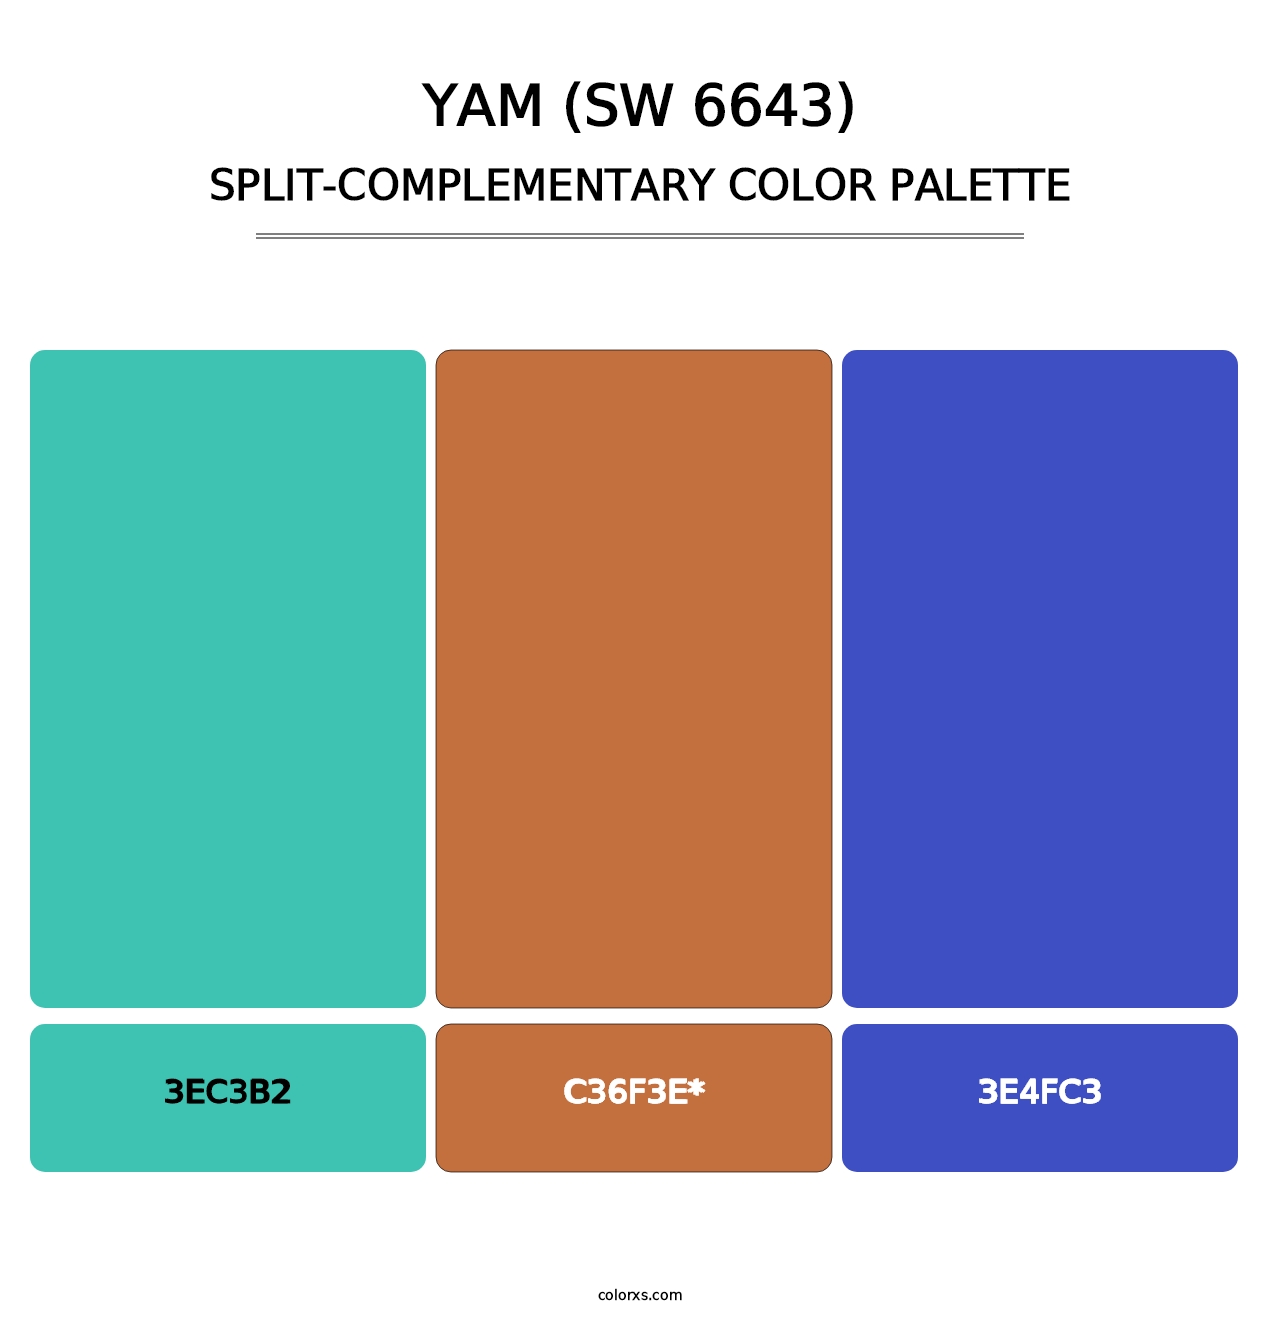 Yam (SW 6643) - Split-Complementary Color Palette